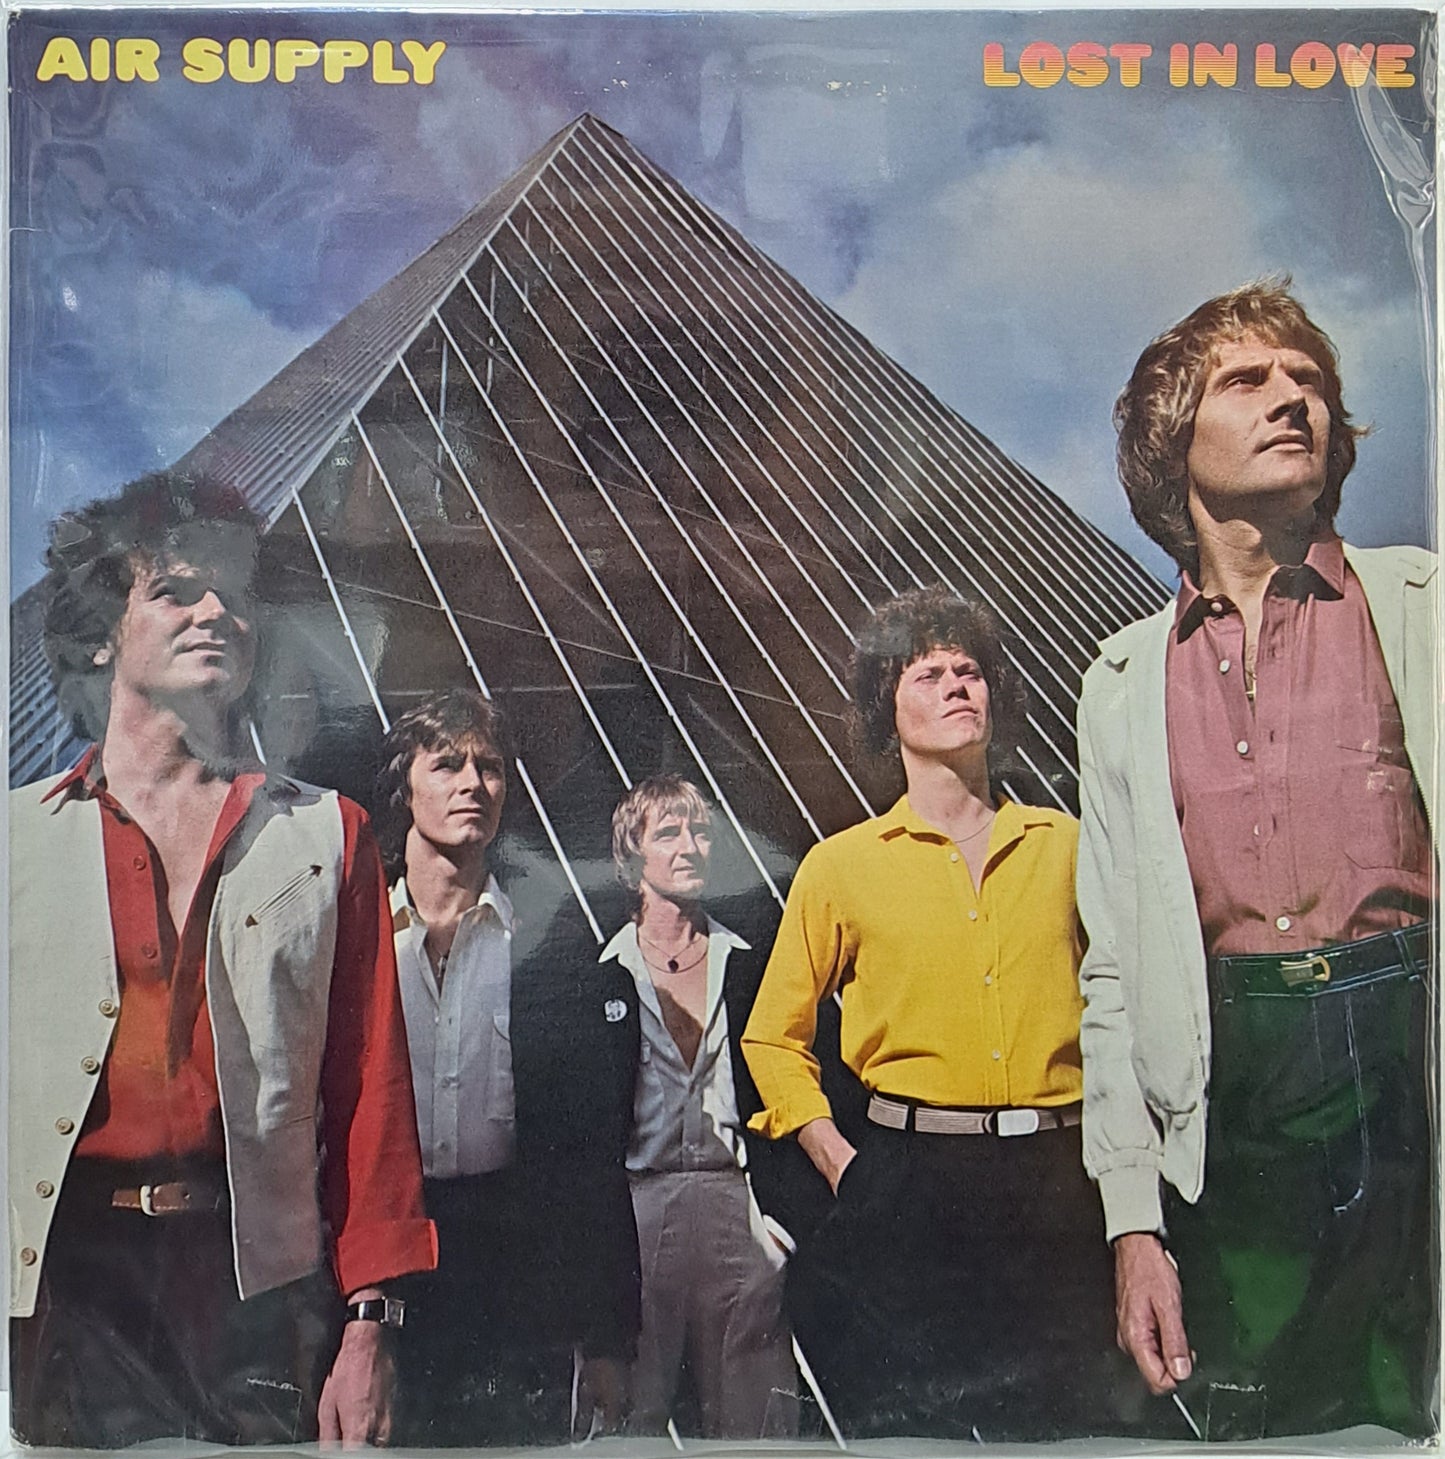 AIR SUPPLY - LOST IS LOVE  LP